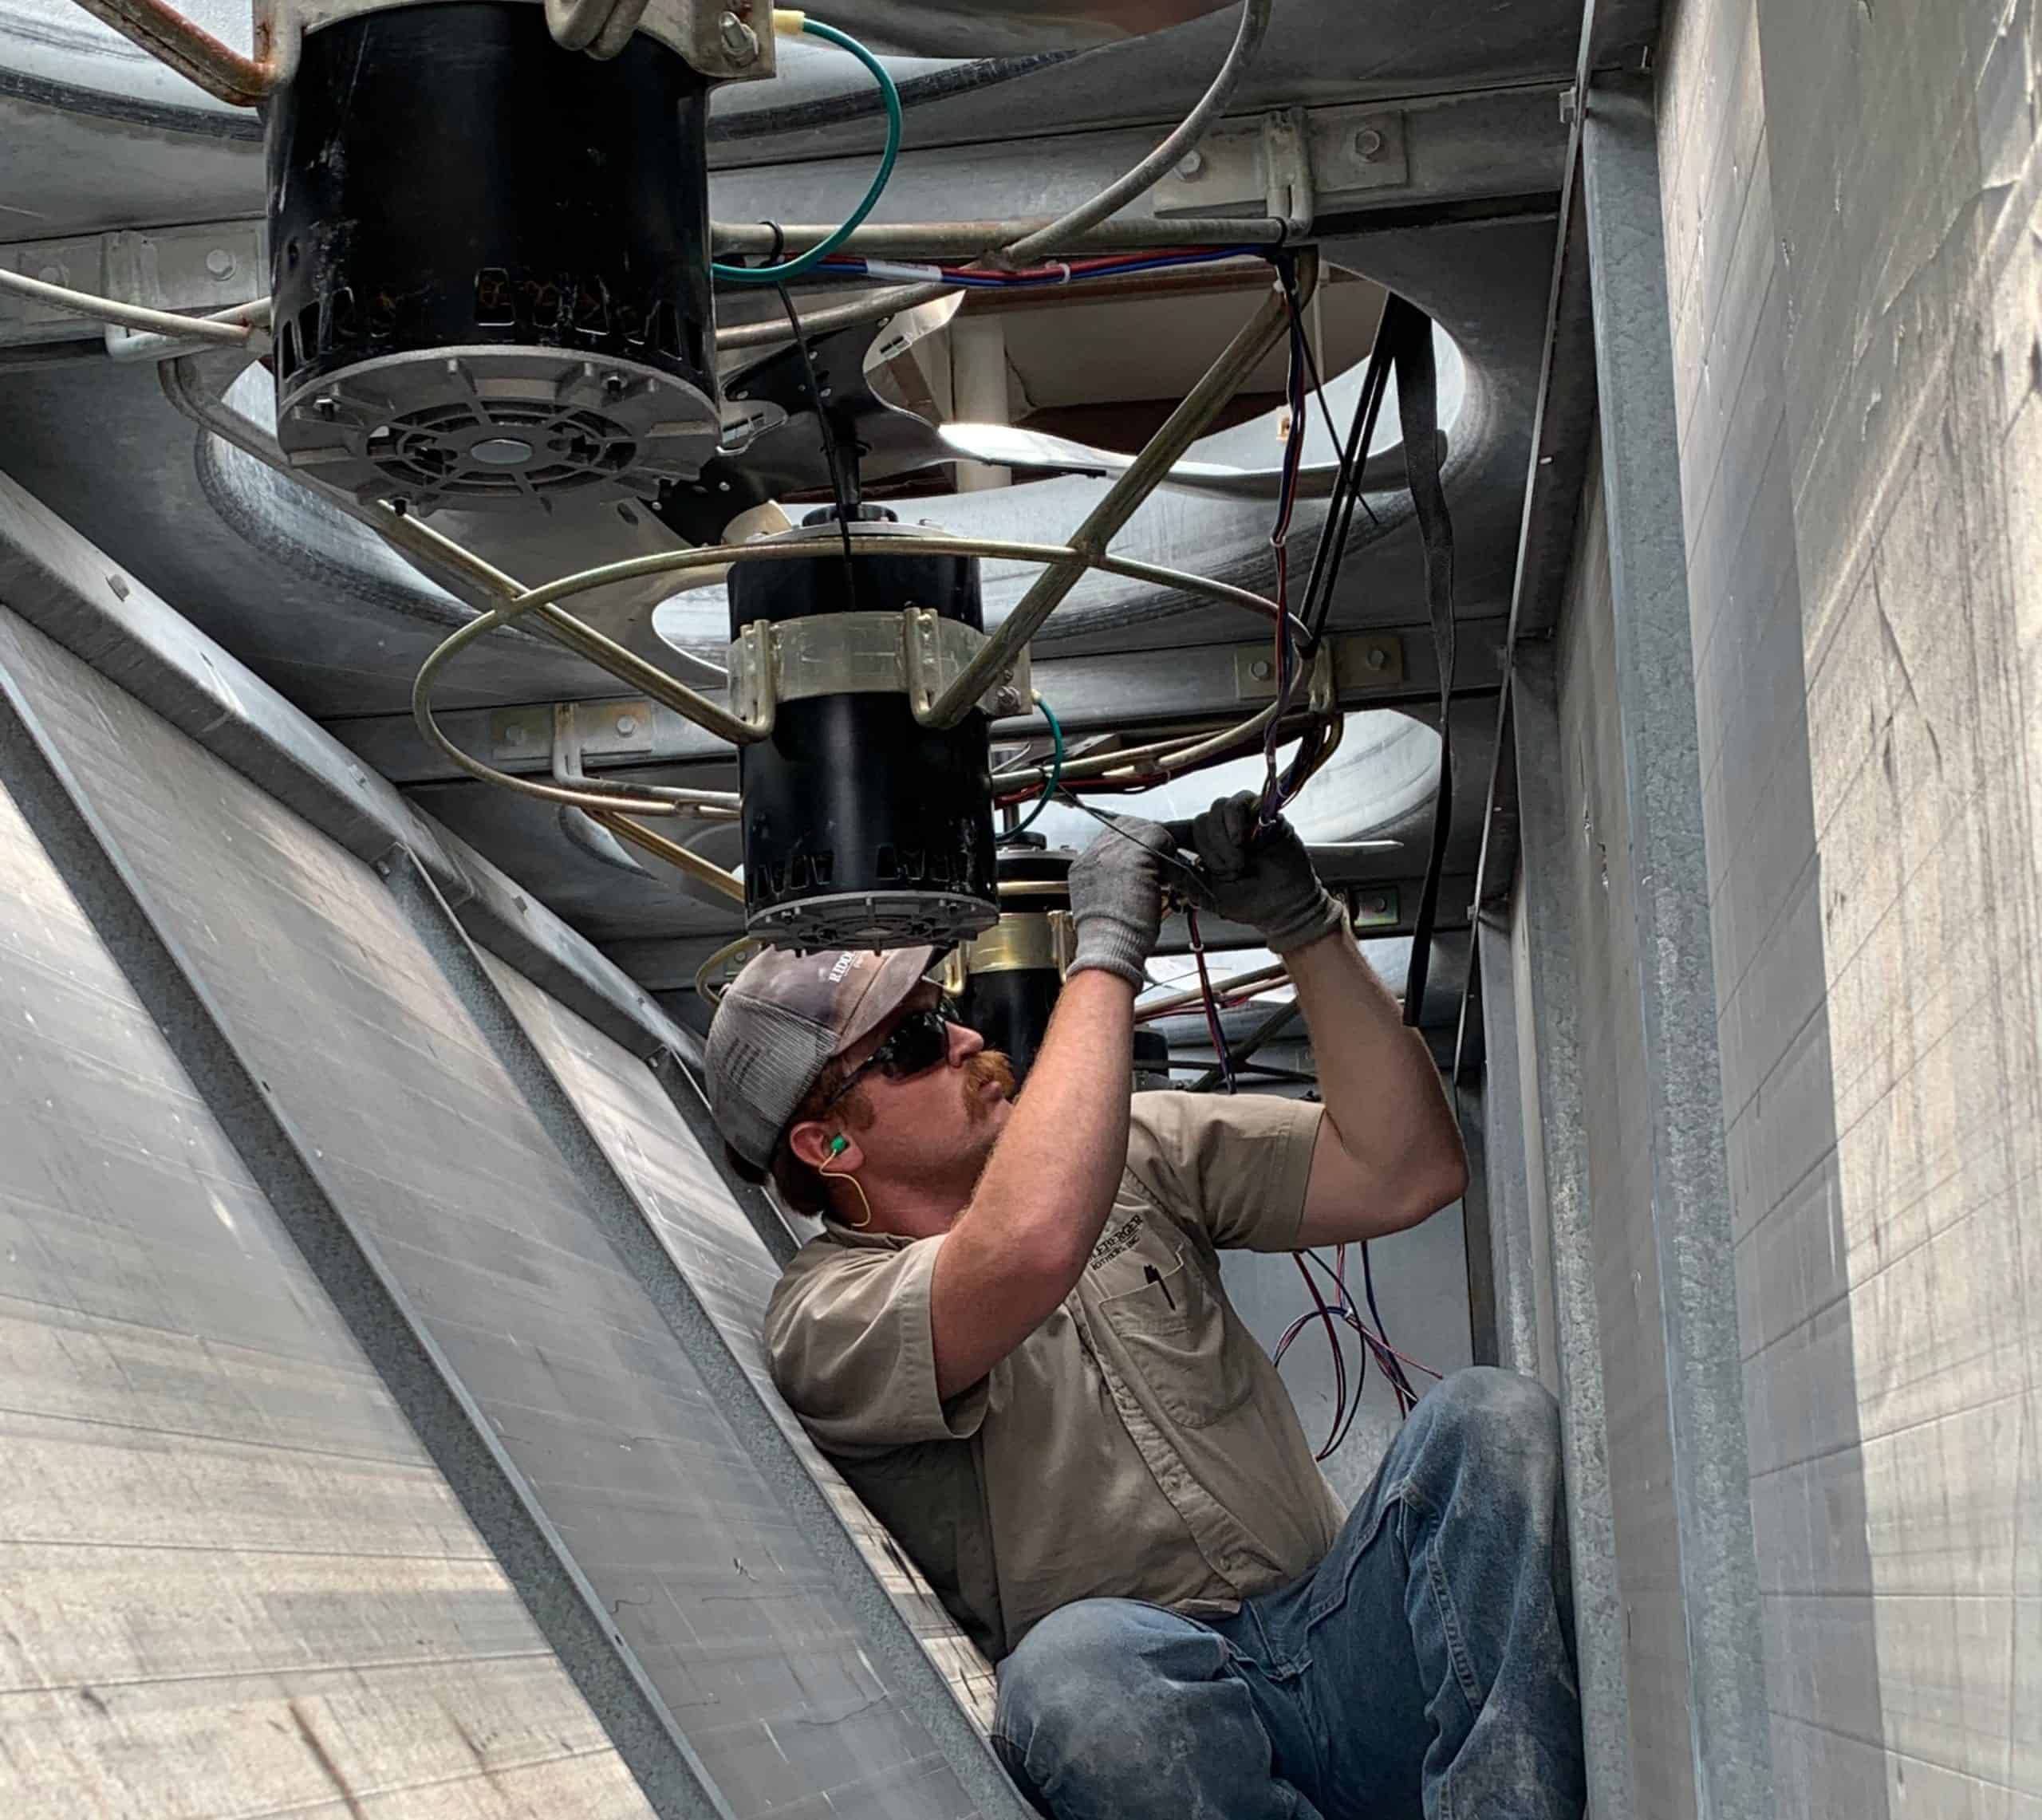 RBI technician wiring fans for HVAC system